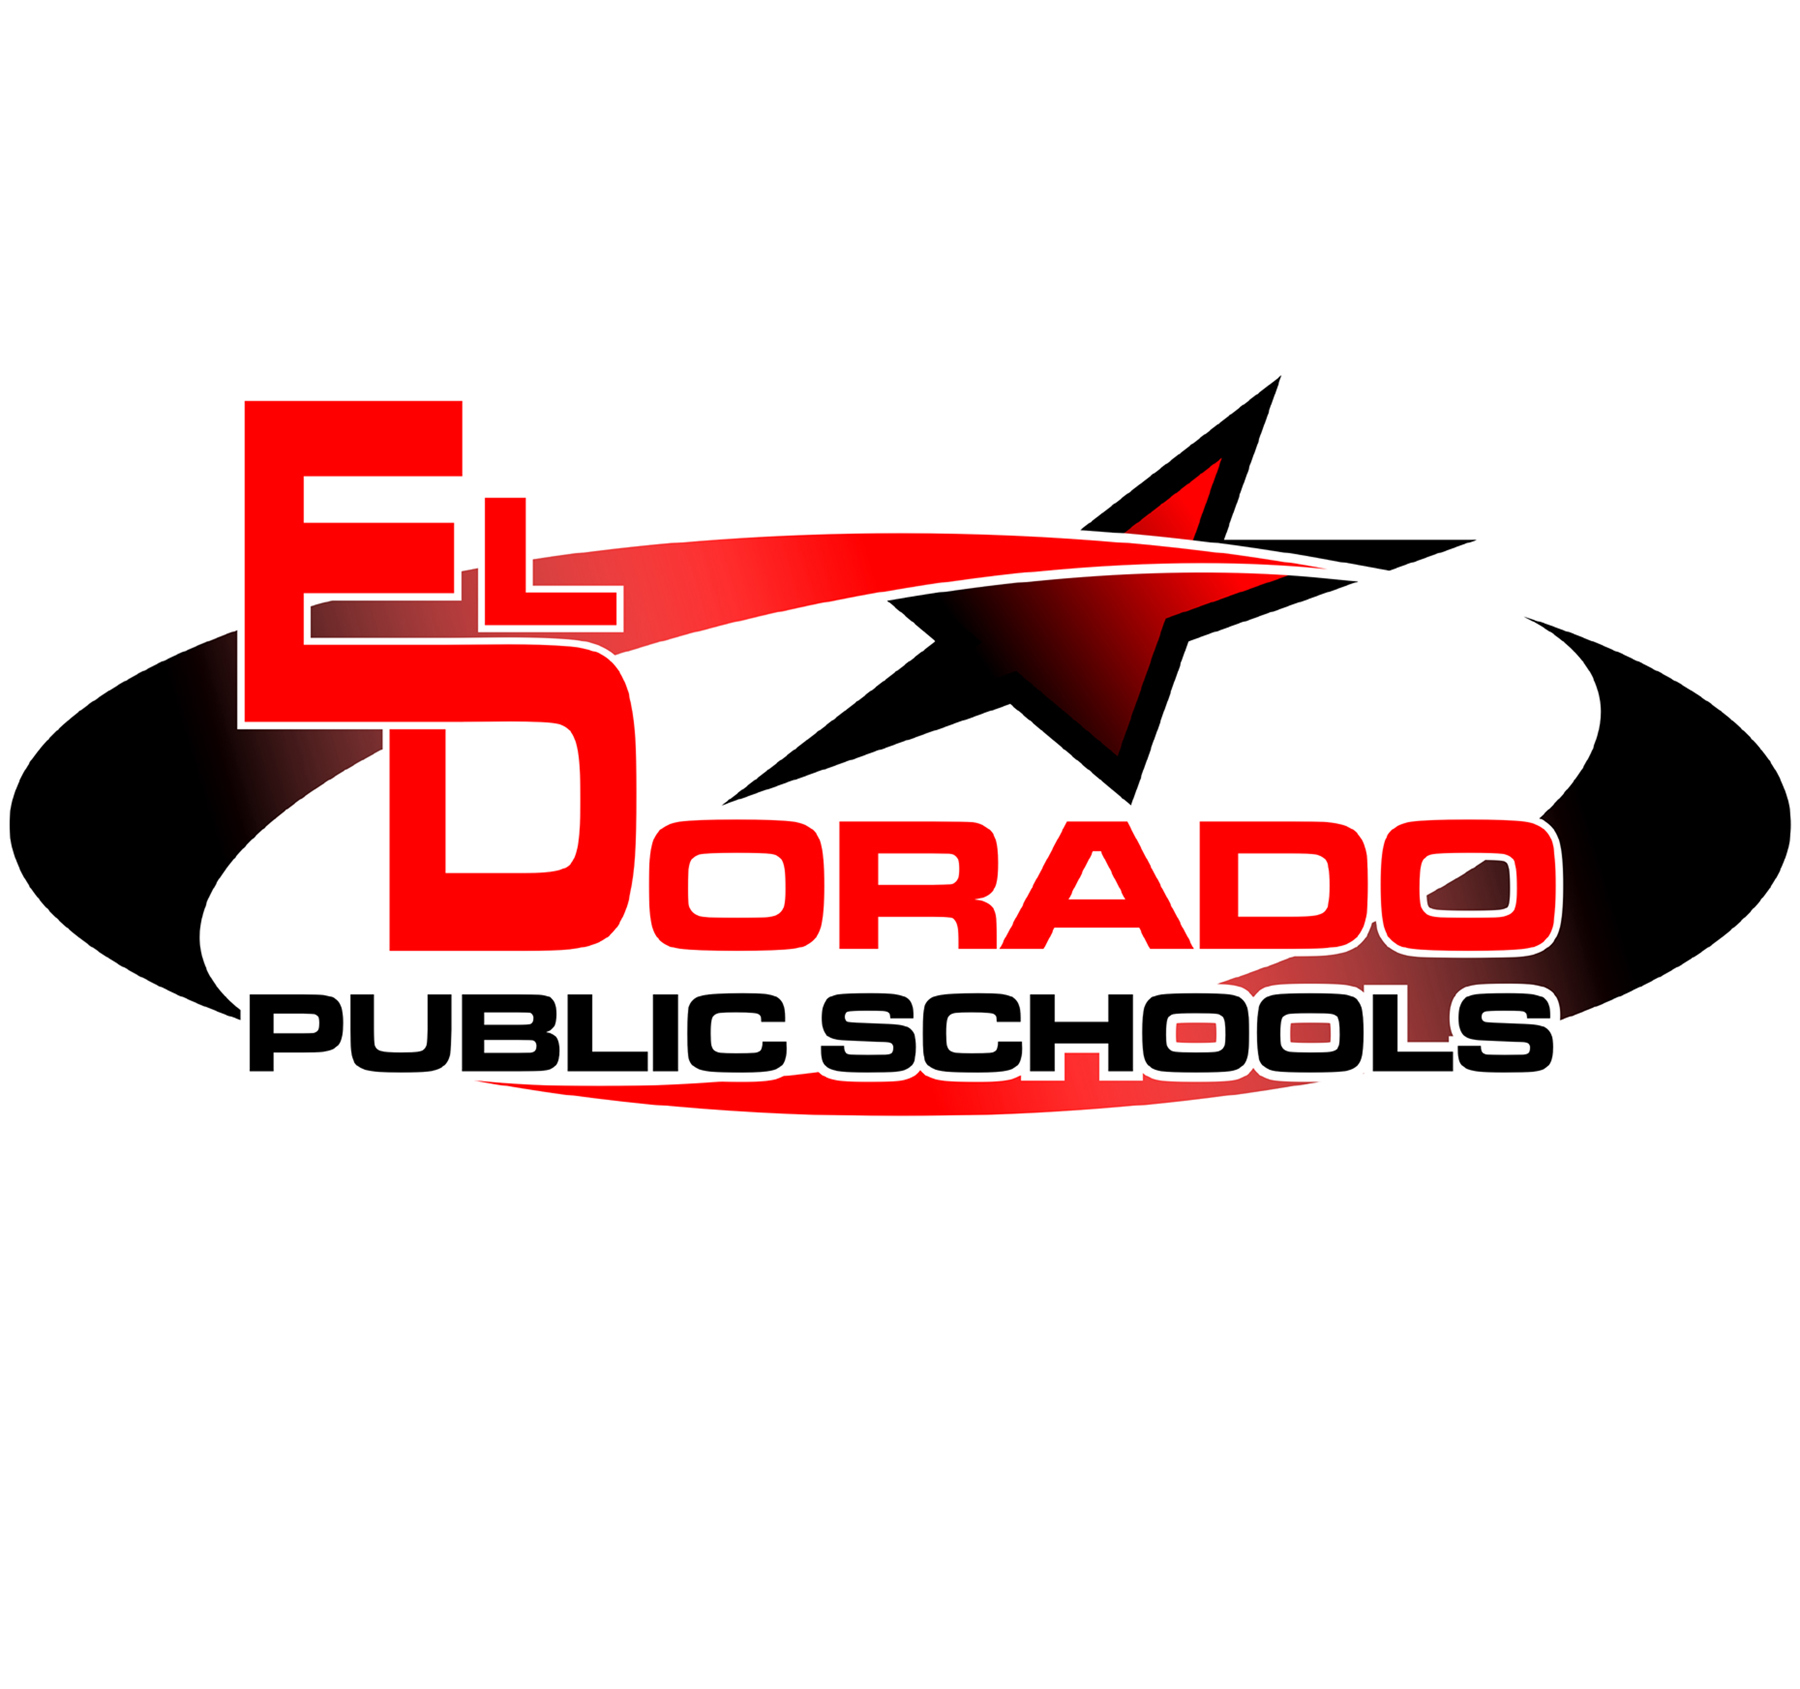 USD 490 logo with Red text "El Dorado" and black text "Public Schools" with a black oval and a red/black star on top